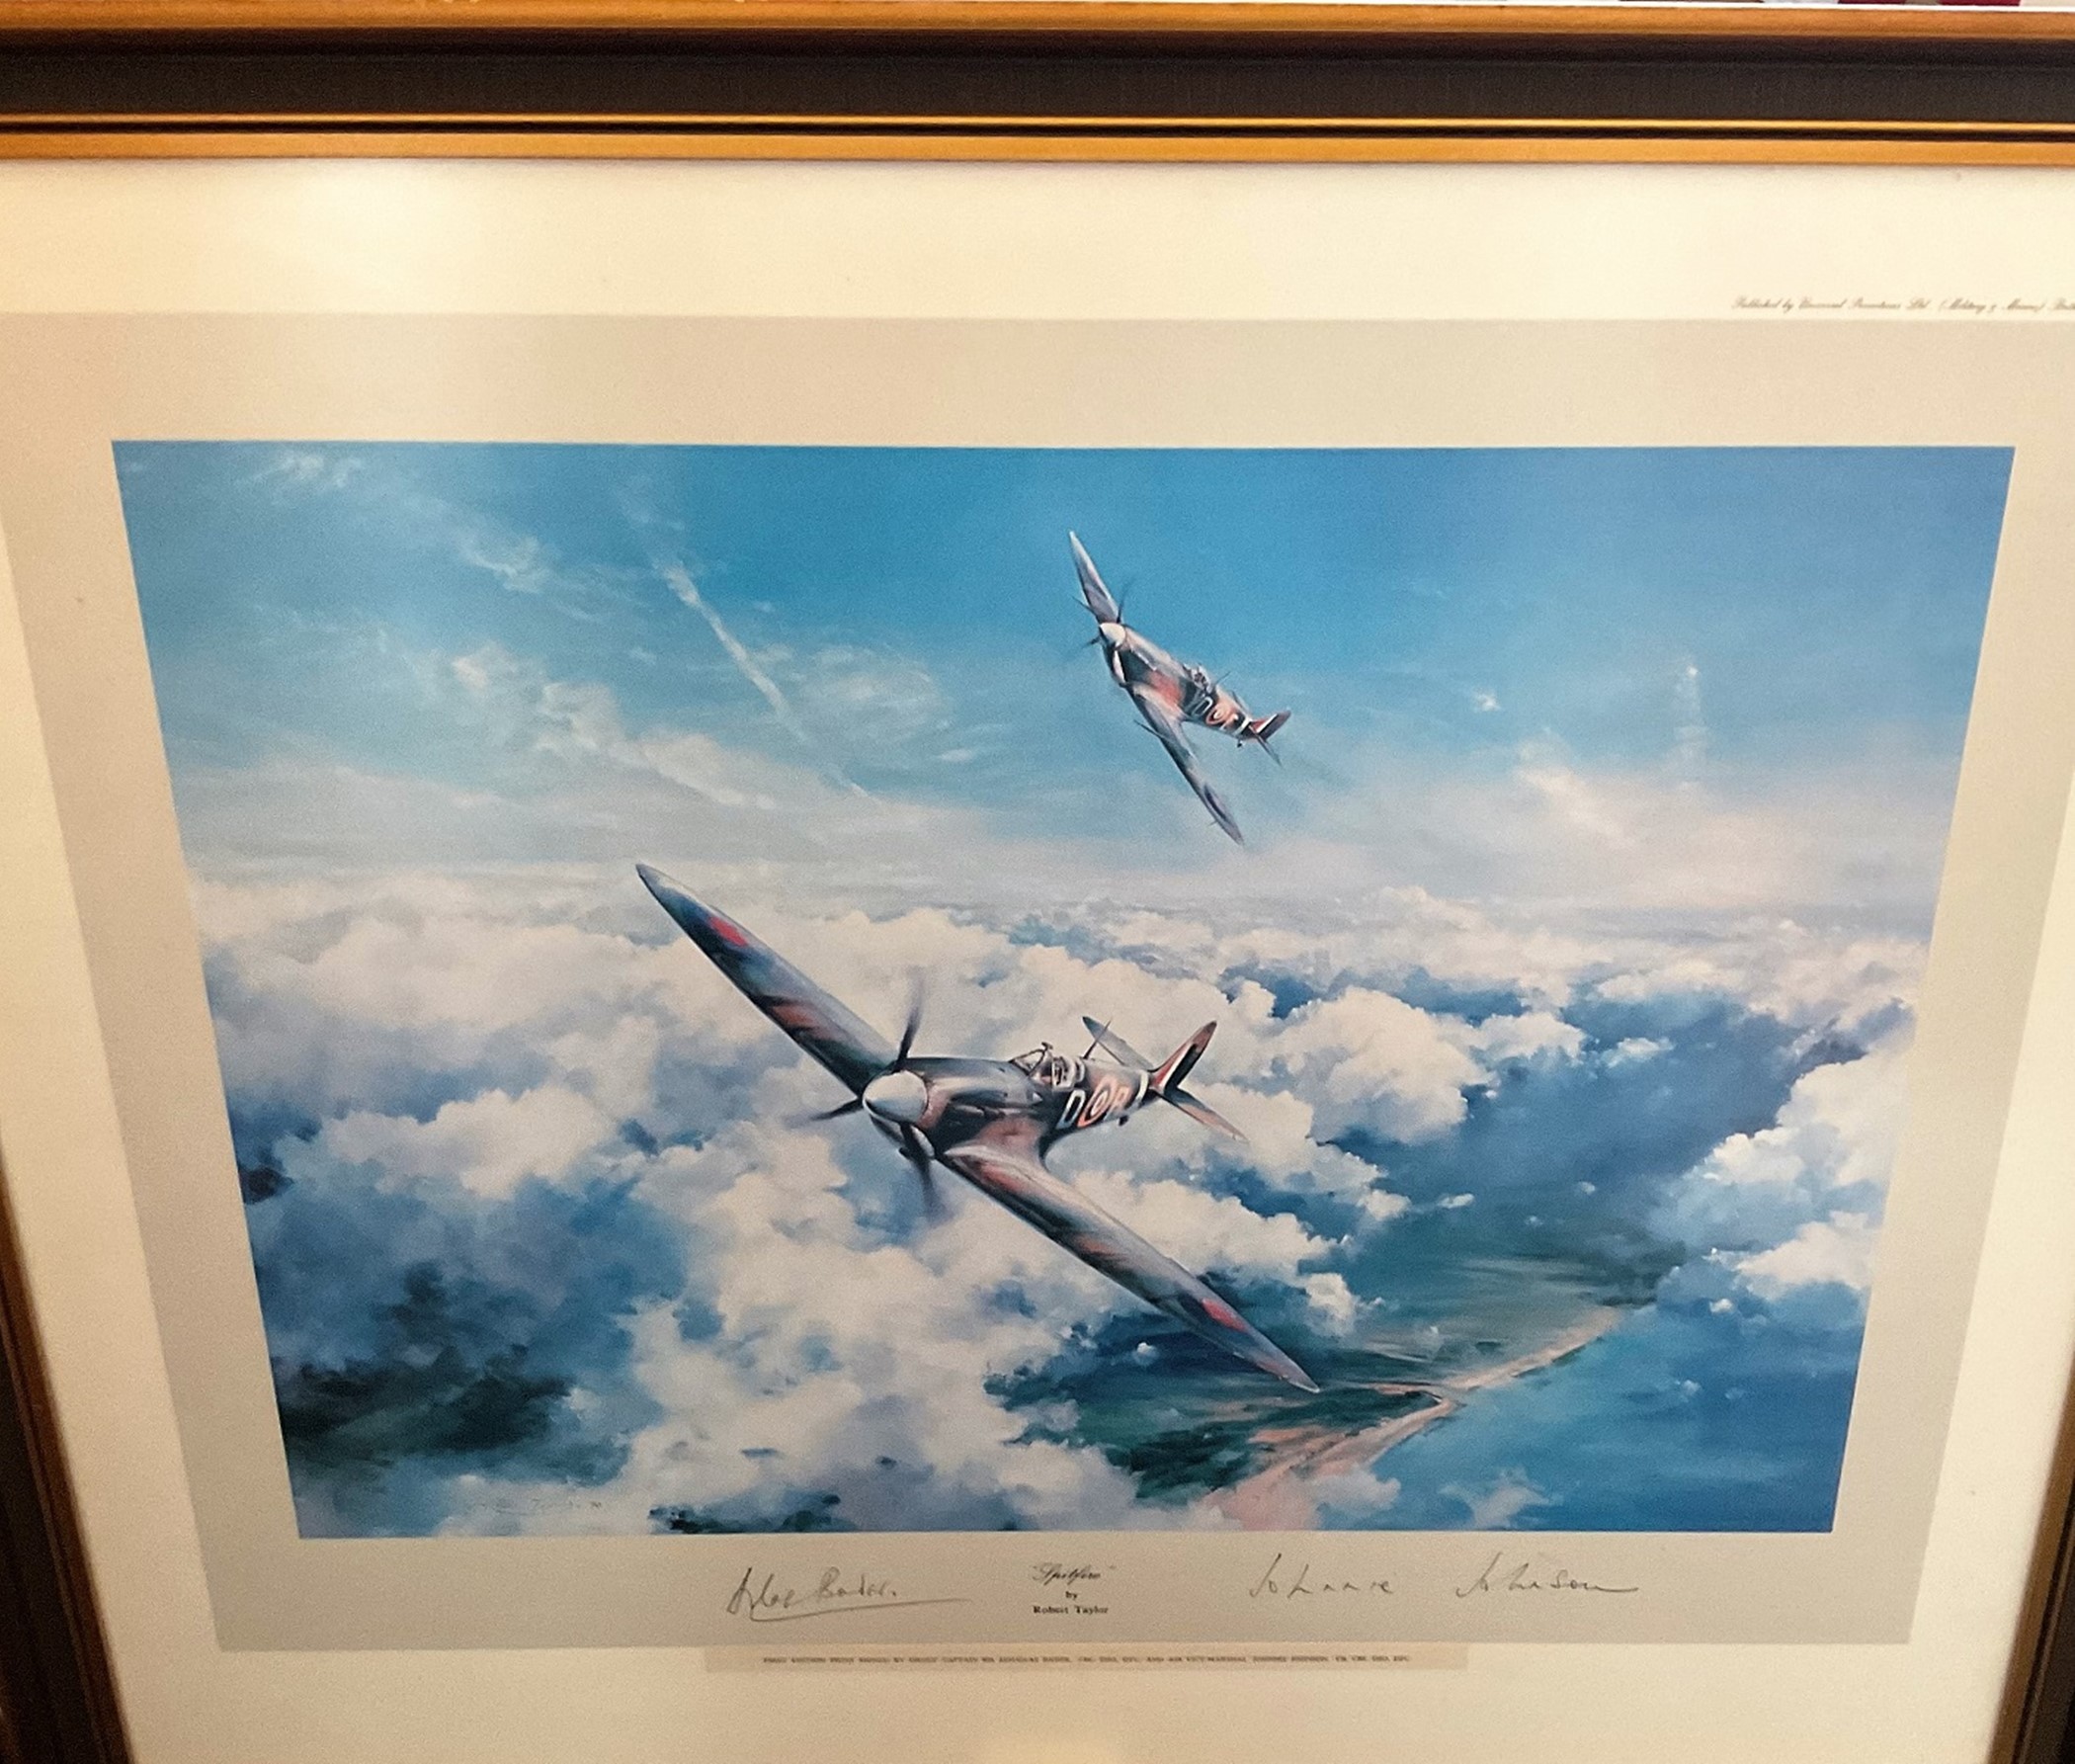 World War II Grp Cpt Douglas Bader and AVM Johnnie Johnson signed Robert Taylor 26x23 mounted and